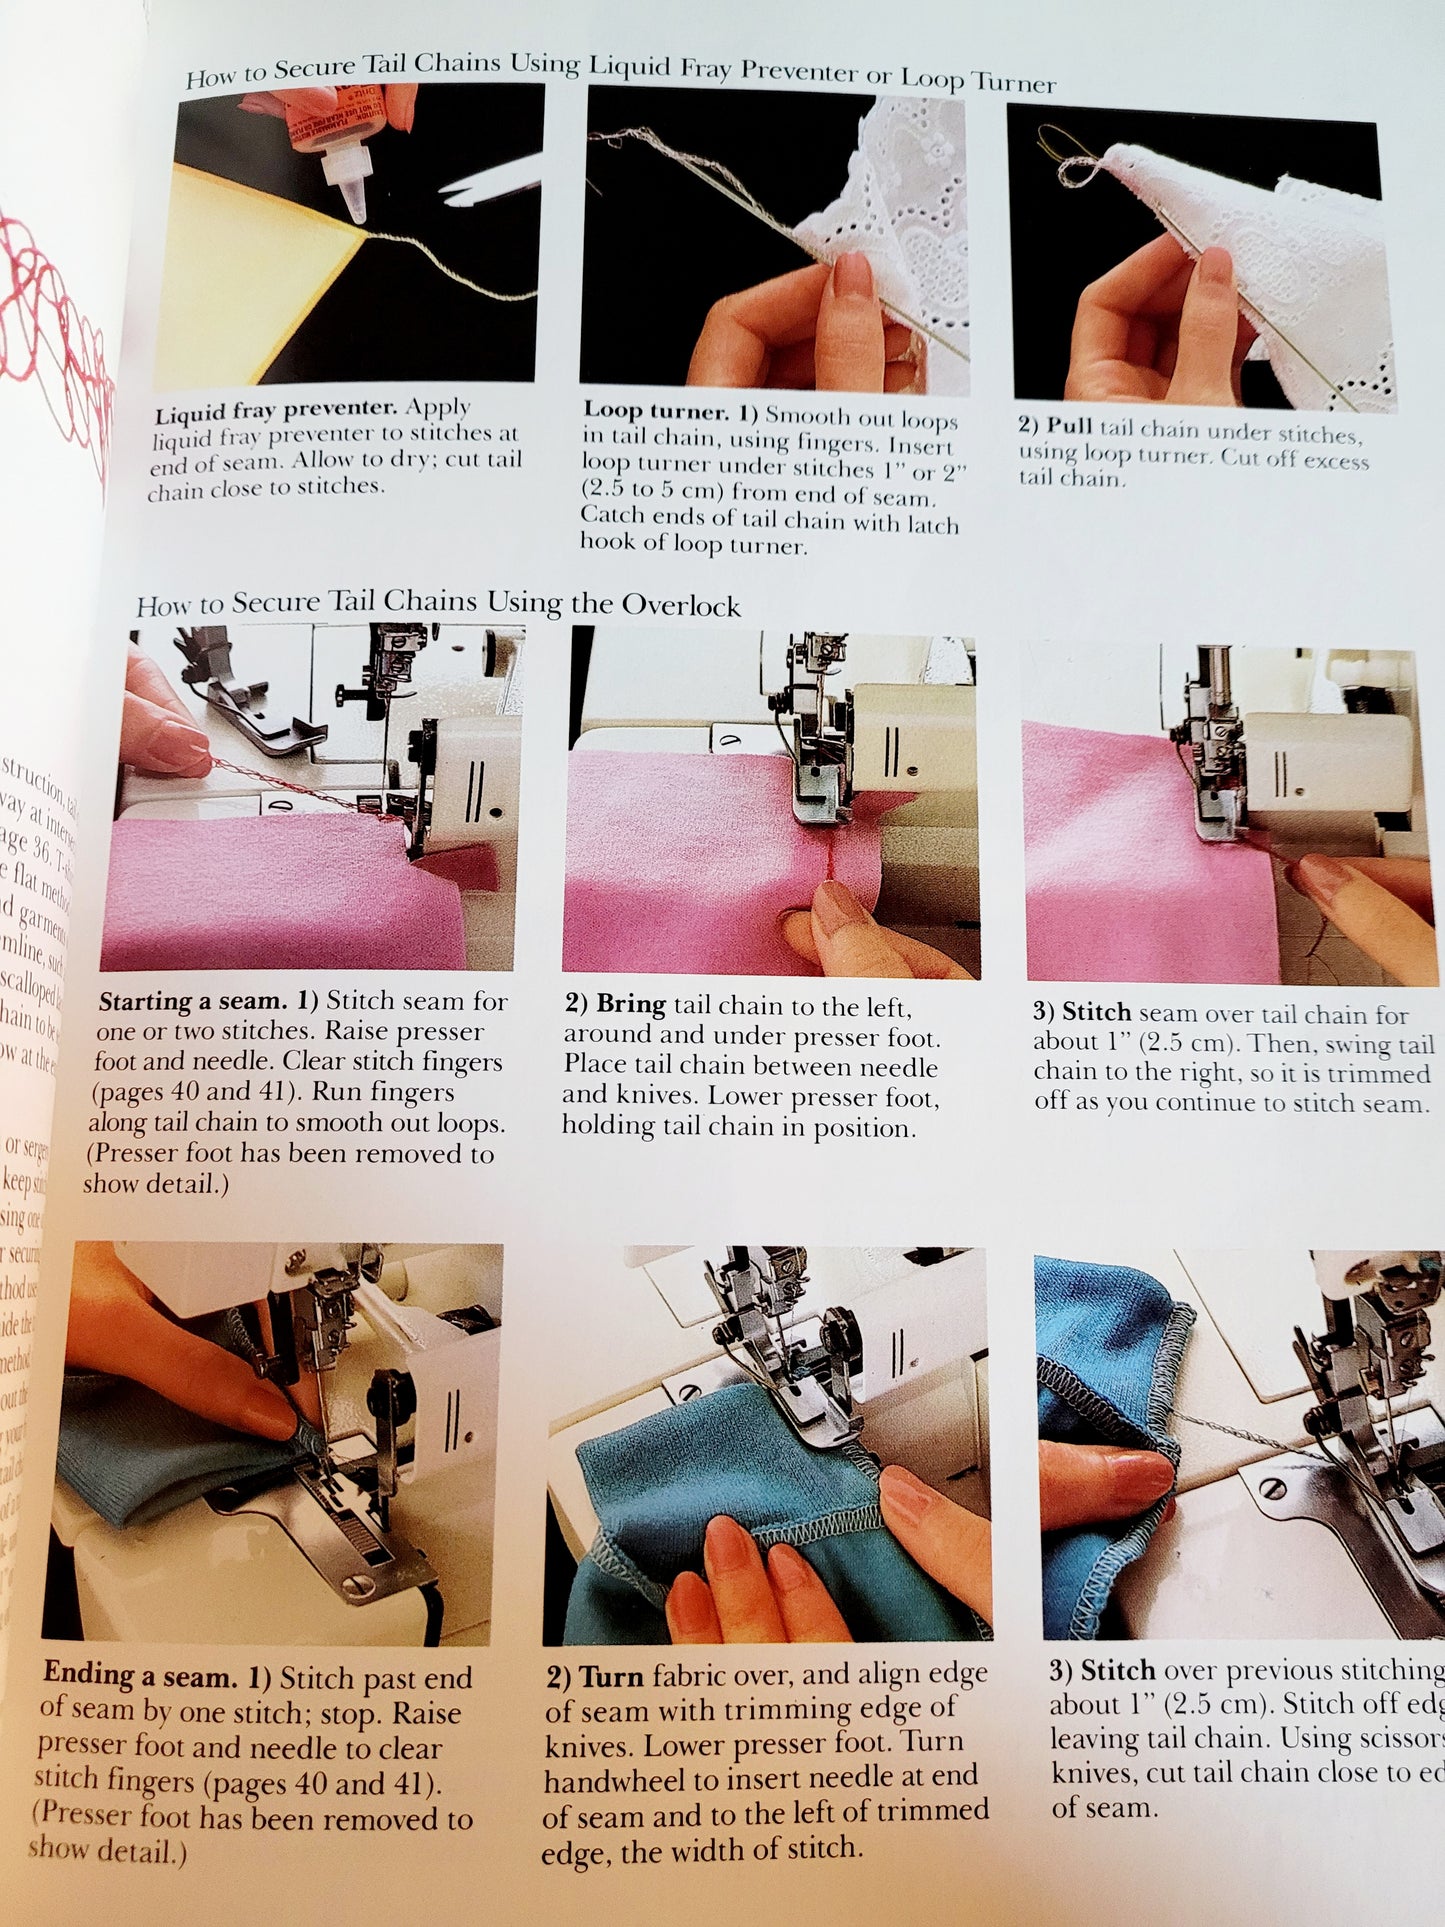 "Sewing with an Overlock" (A Singer Sewing Reference Library) 350+ Colored Pages